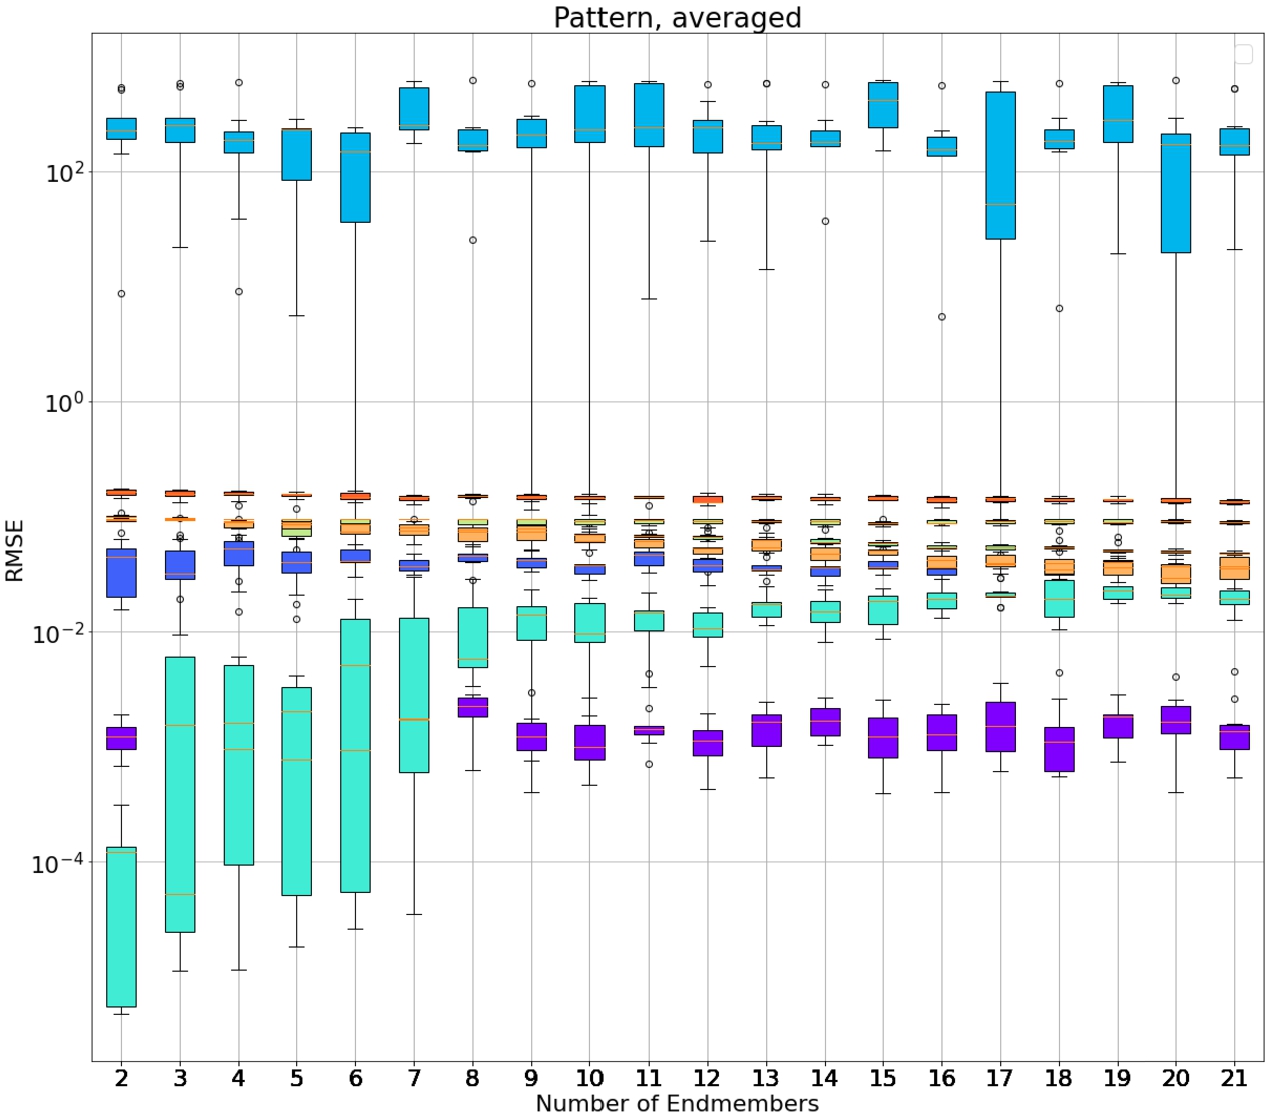 Endmember robustness experiment result with box plots for each endmember group and algorithm. (Colours: purple – SUnSAL, dark blue – SUnSAL-TV, blue – SGSNMF, light blue – S2WSU, cyan – RSNMF, yellow – R-CoNMF, orange – CNMF, red – ALMM.) A combined synthetic IEEE GRSS and USGS spectral library dataset was used as test data.